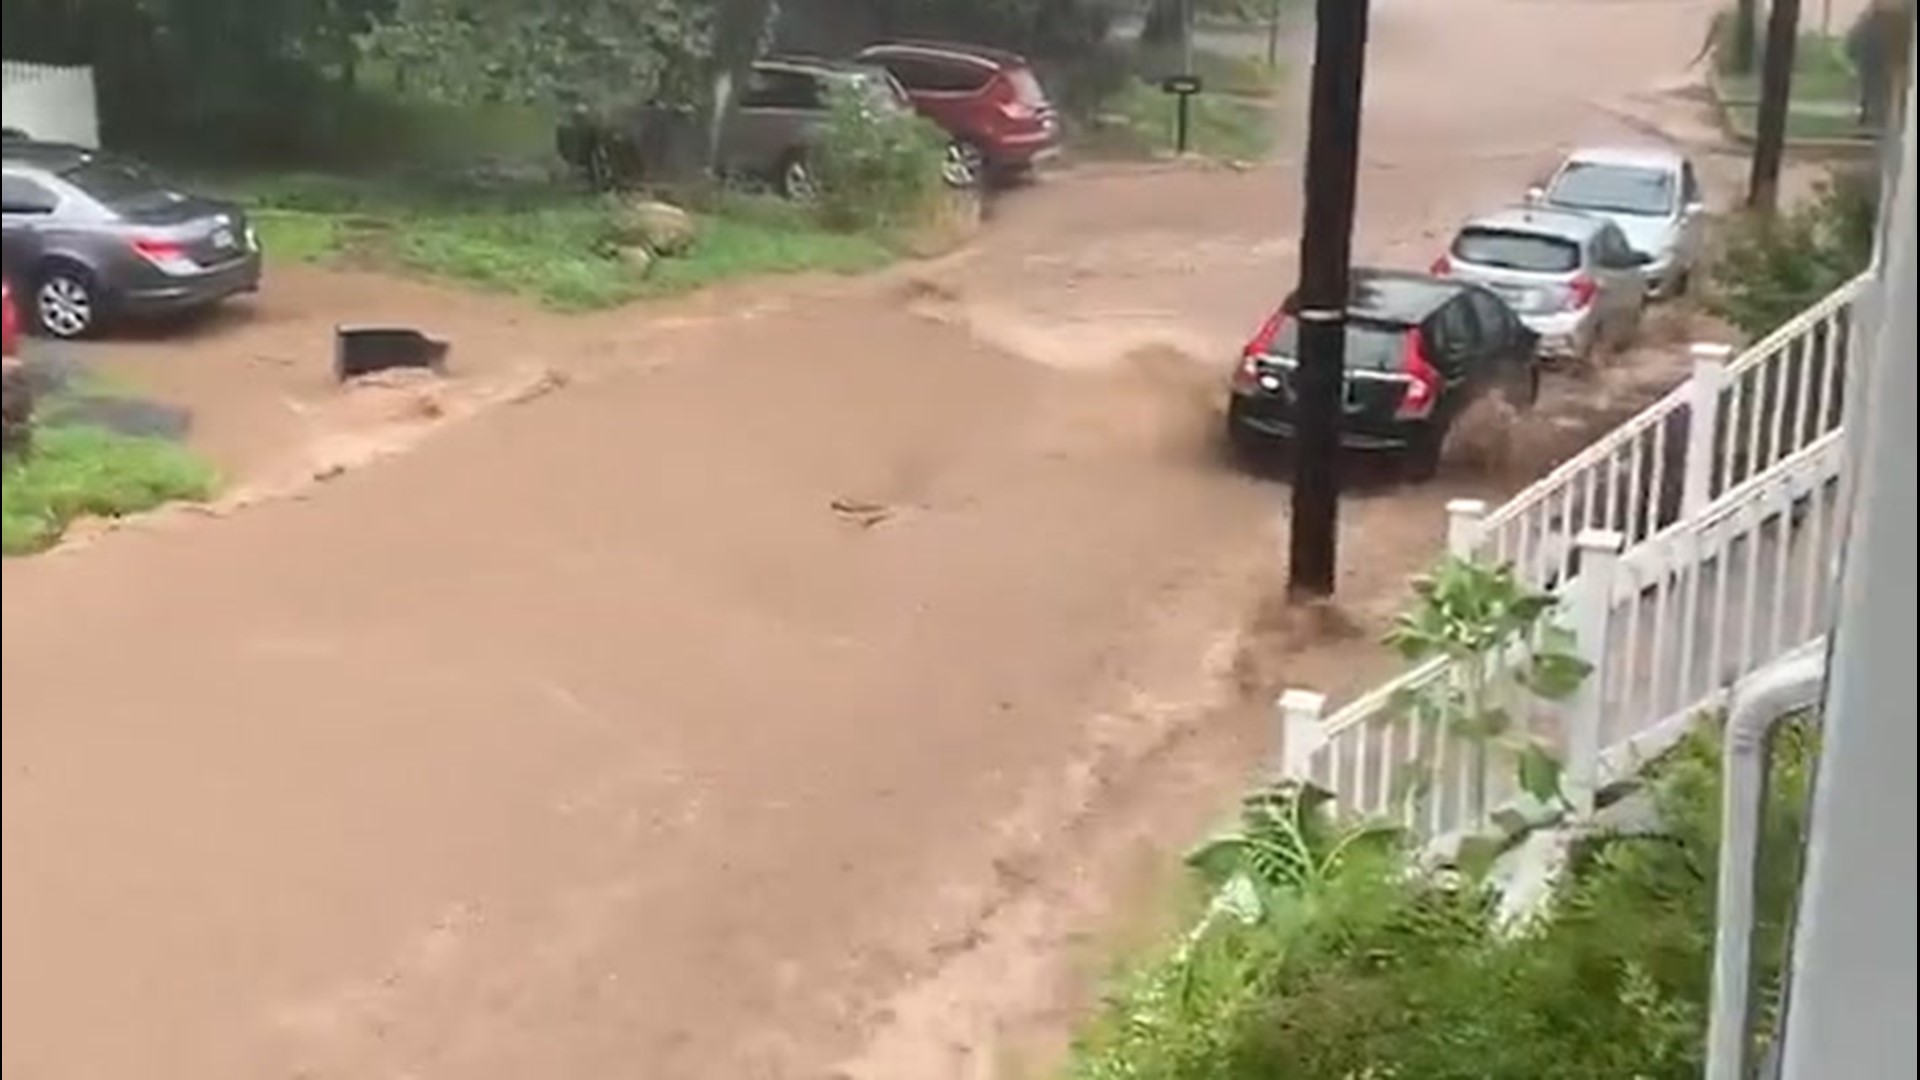 Residents in Ellicott City, Maryland, say flooding issues have returned to a community plagued by flooding problems in the past as storms rolled through Aug. 12.